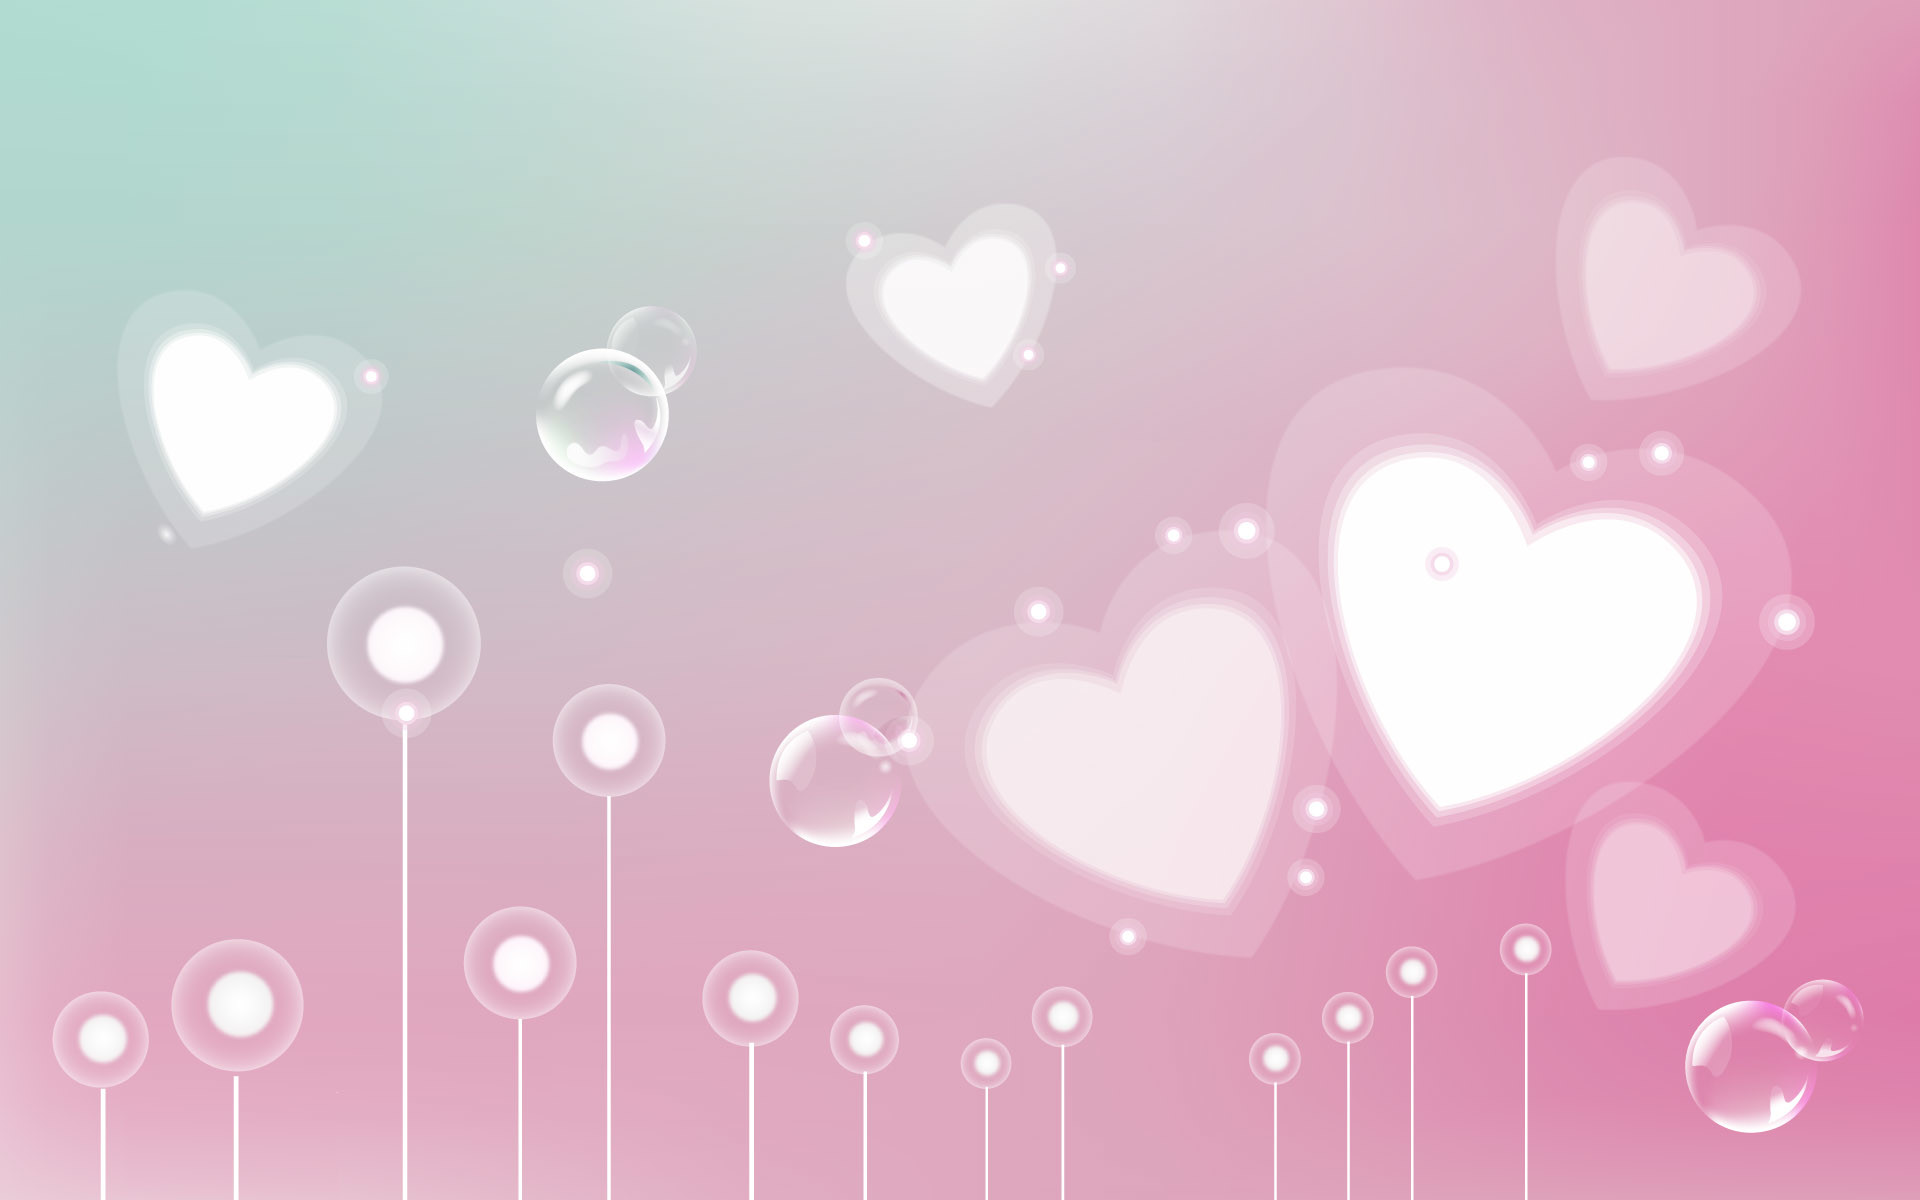 Background growing hearts images there valentine wallpaer wallpaper wallpapers